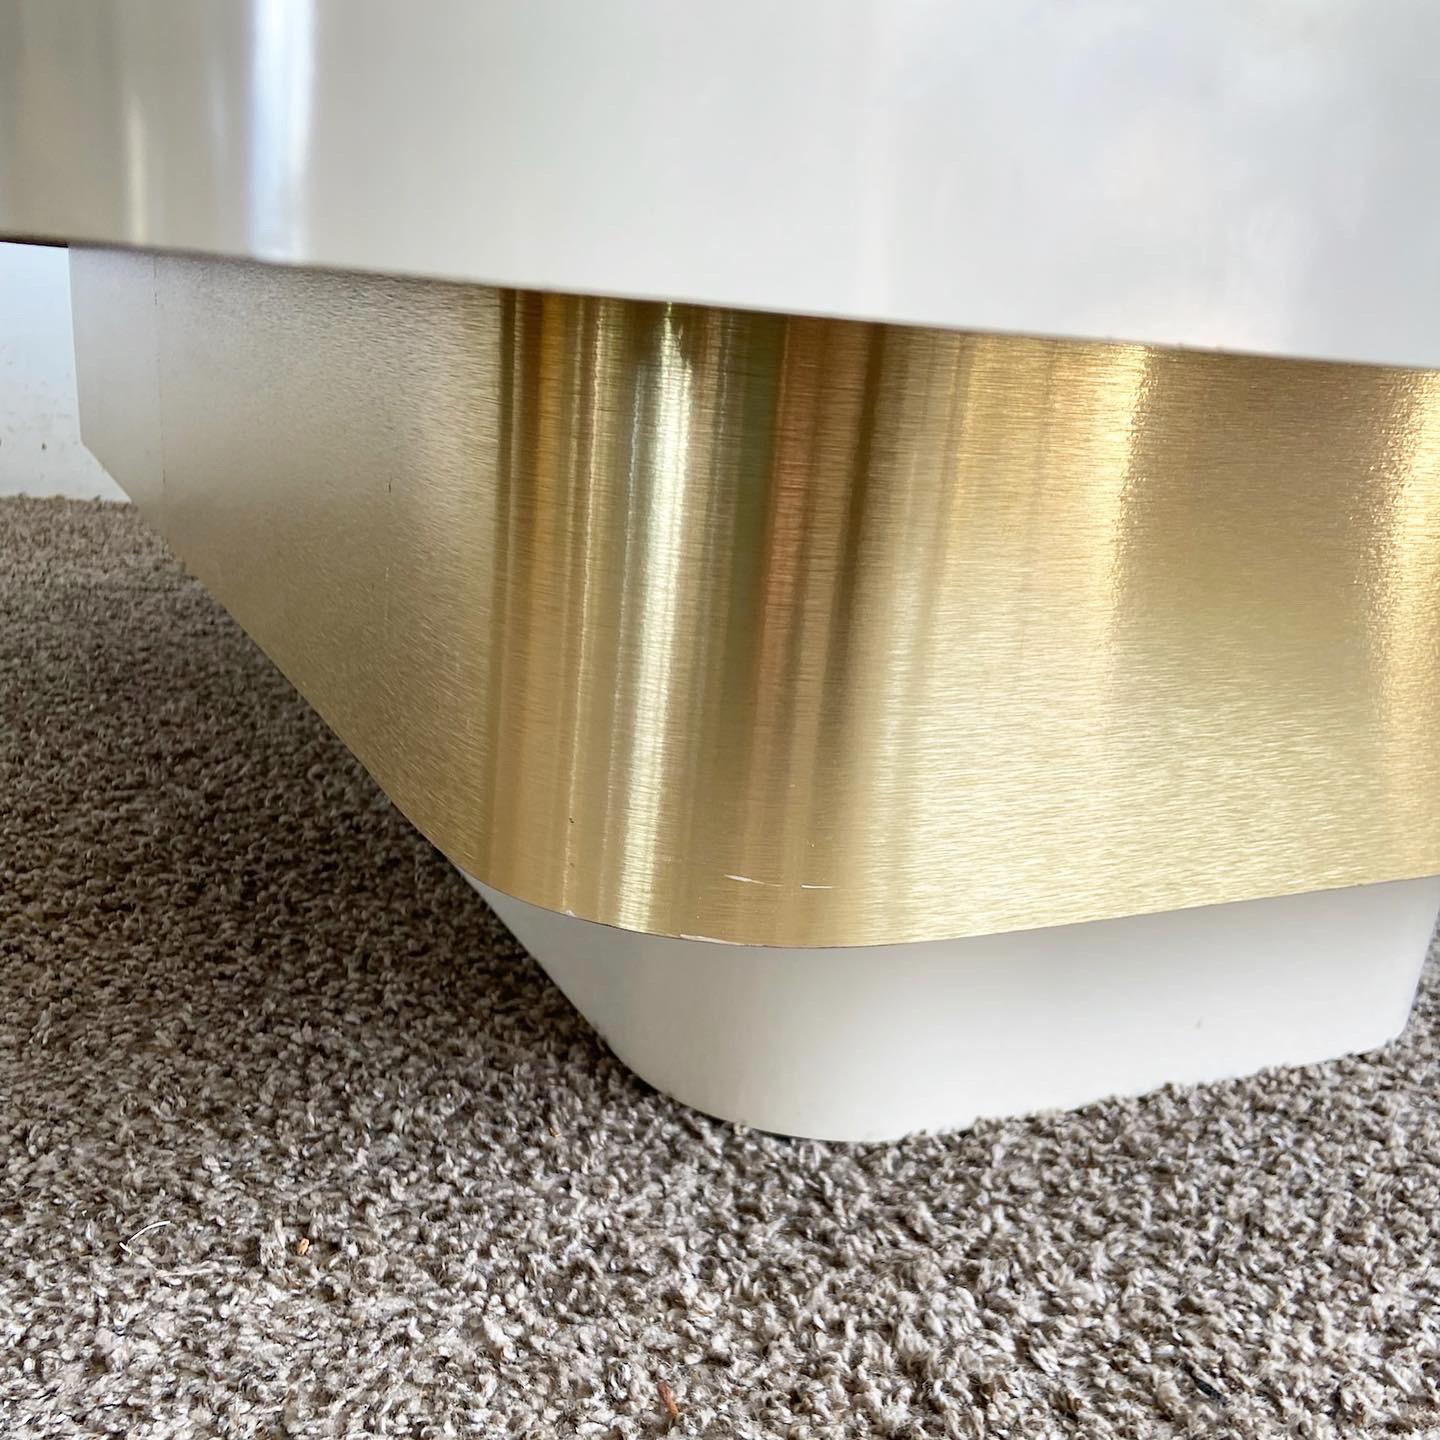 Postmodern Ascending Cream and Gold Coffee Table In Good Condition For Sale In Delray Beach, FL